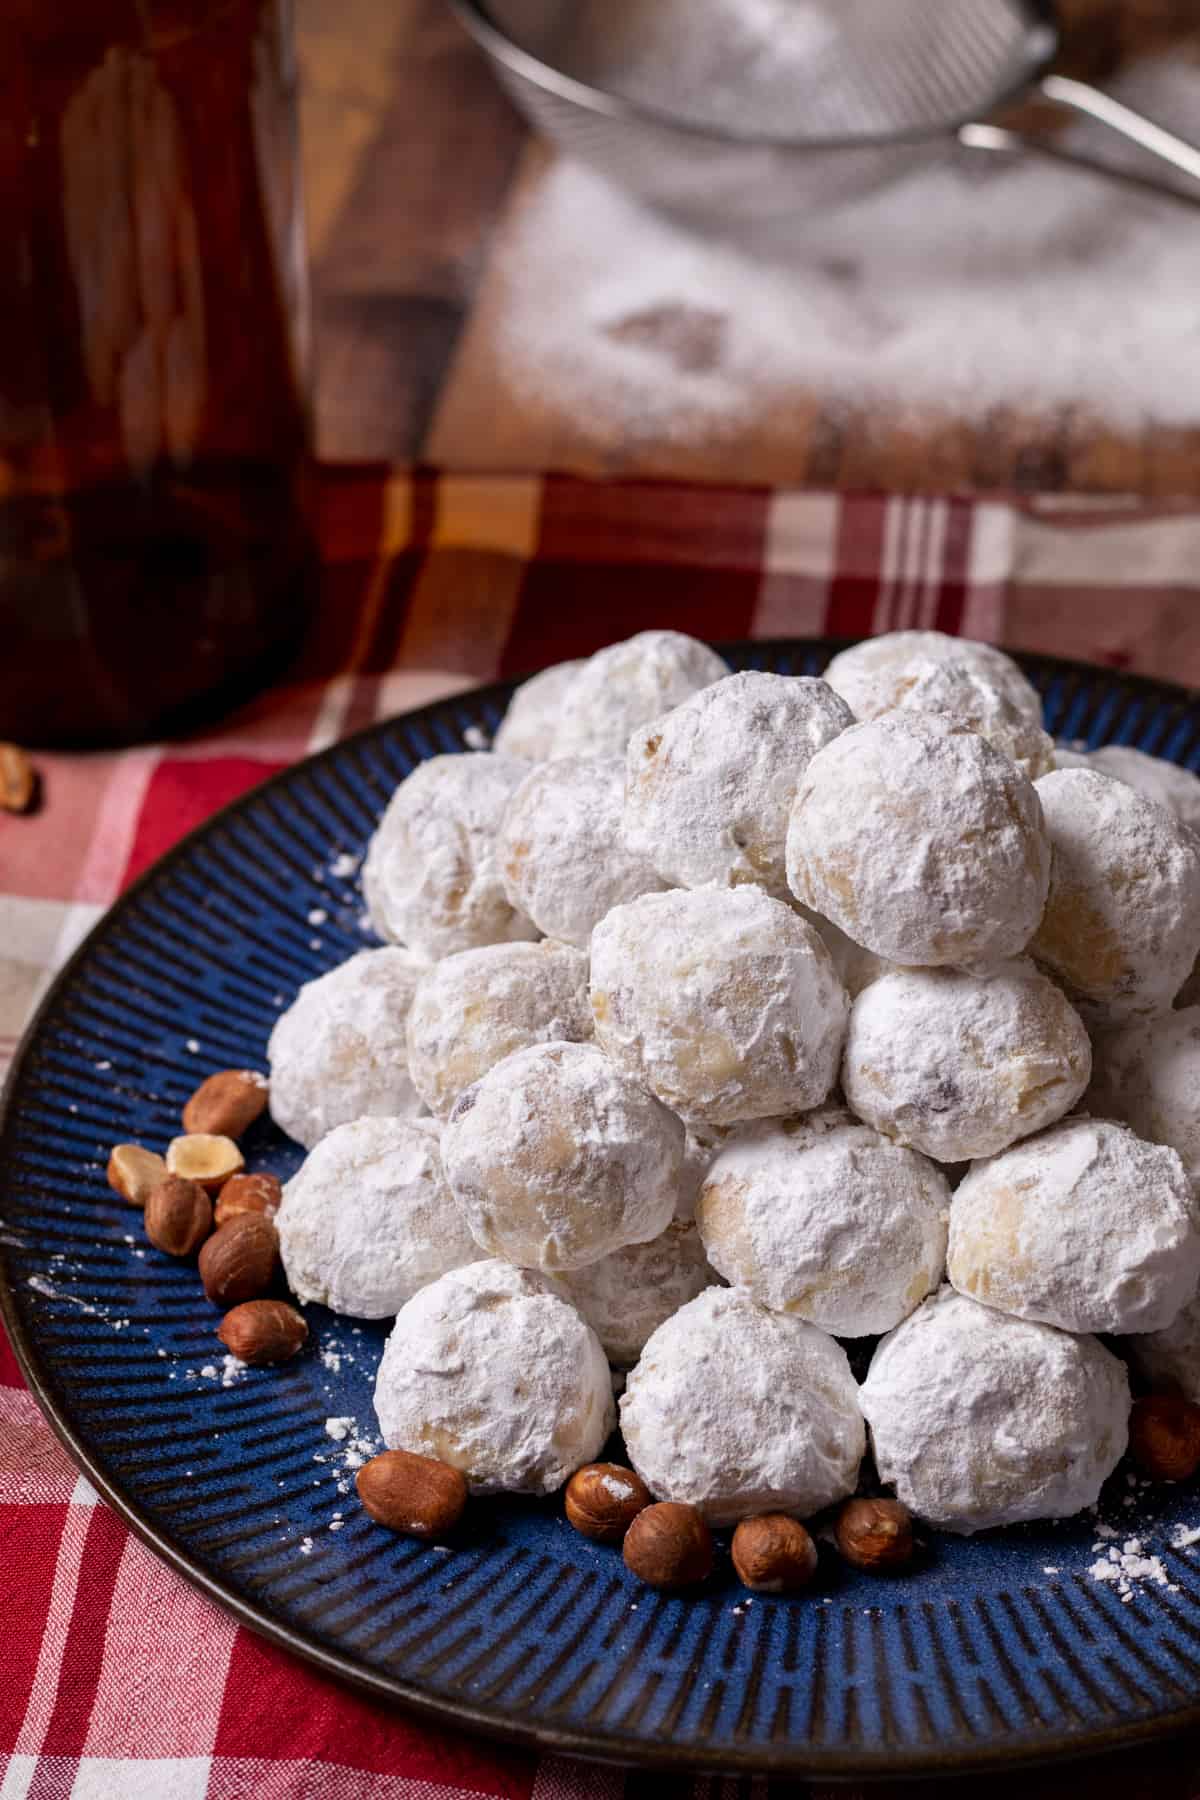 butterball cookies on a blue plate with hazelnuts